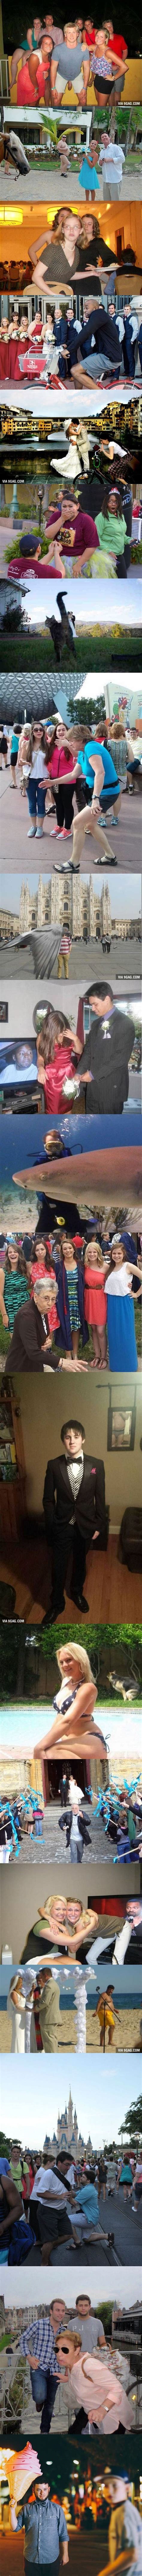 The 20 Majestic Accidental Photobomb Funny Photos Funny Pictures